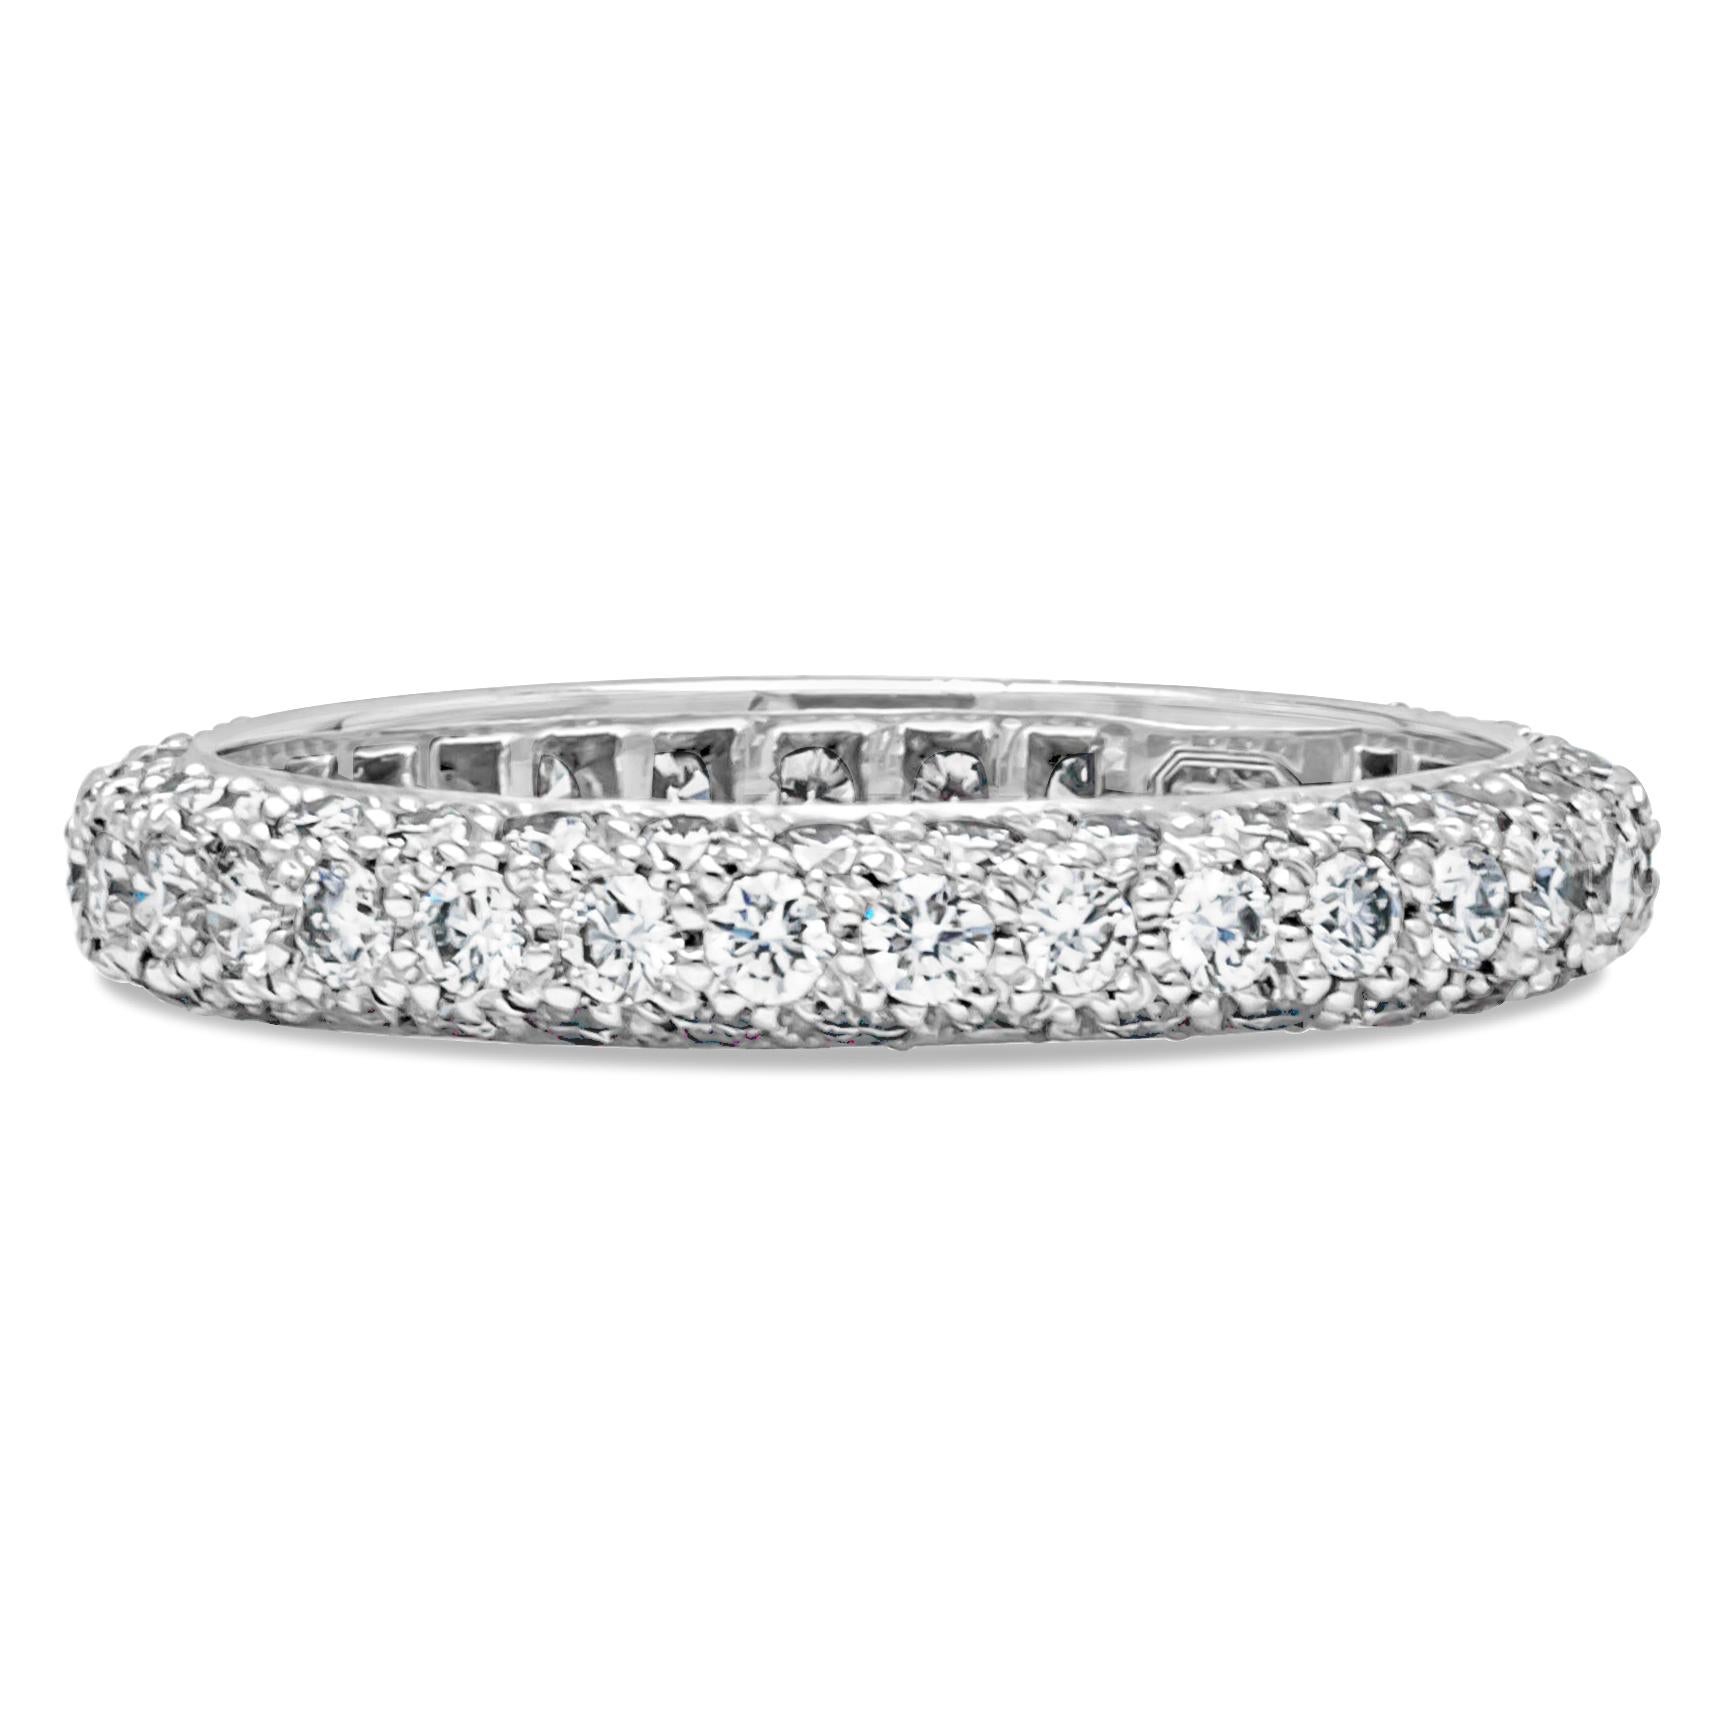 A classic diamond eternity wedding band by Harry Winston, showcasing a multi-row circle of 99 round brilliant cut diamonds weighing 1.08 carats total with D-E-F color and VS clarity. Set on a micro-pavé dome platinum, 3 mm in width. Size 5 US,